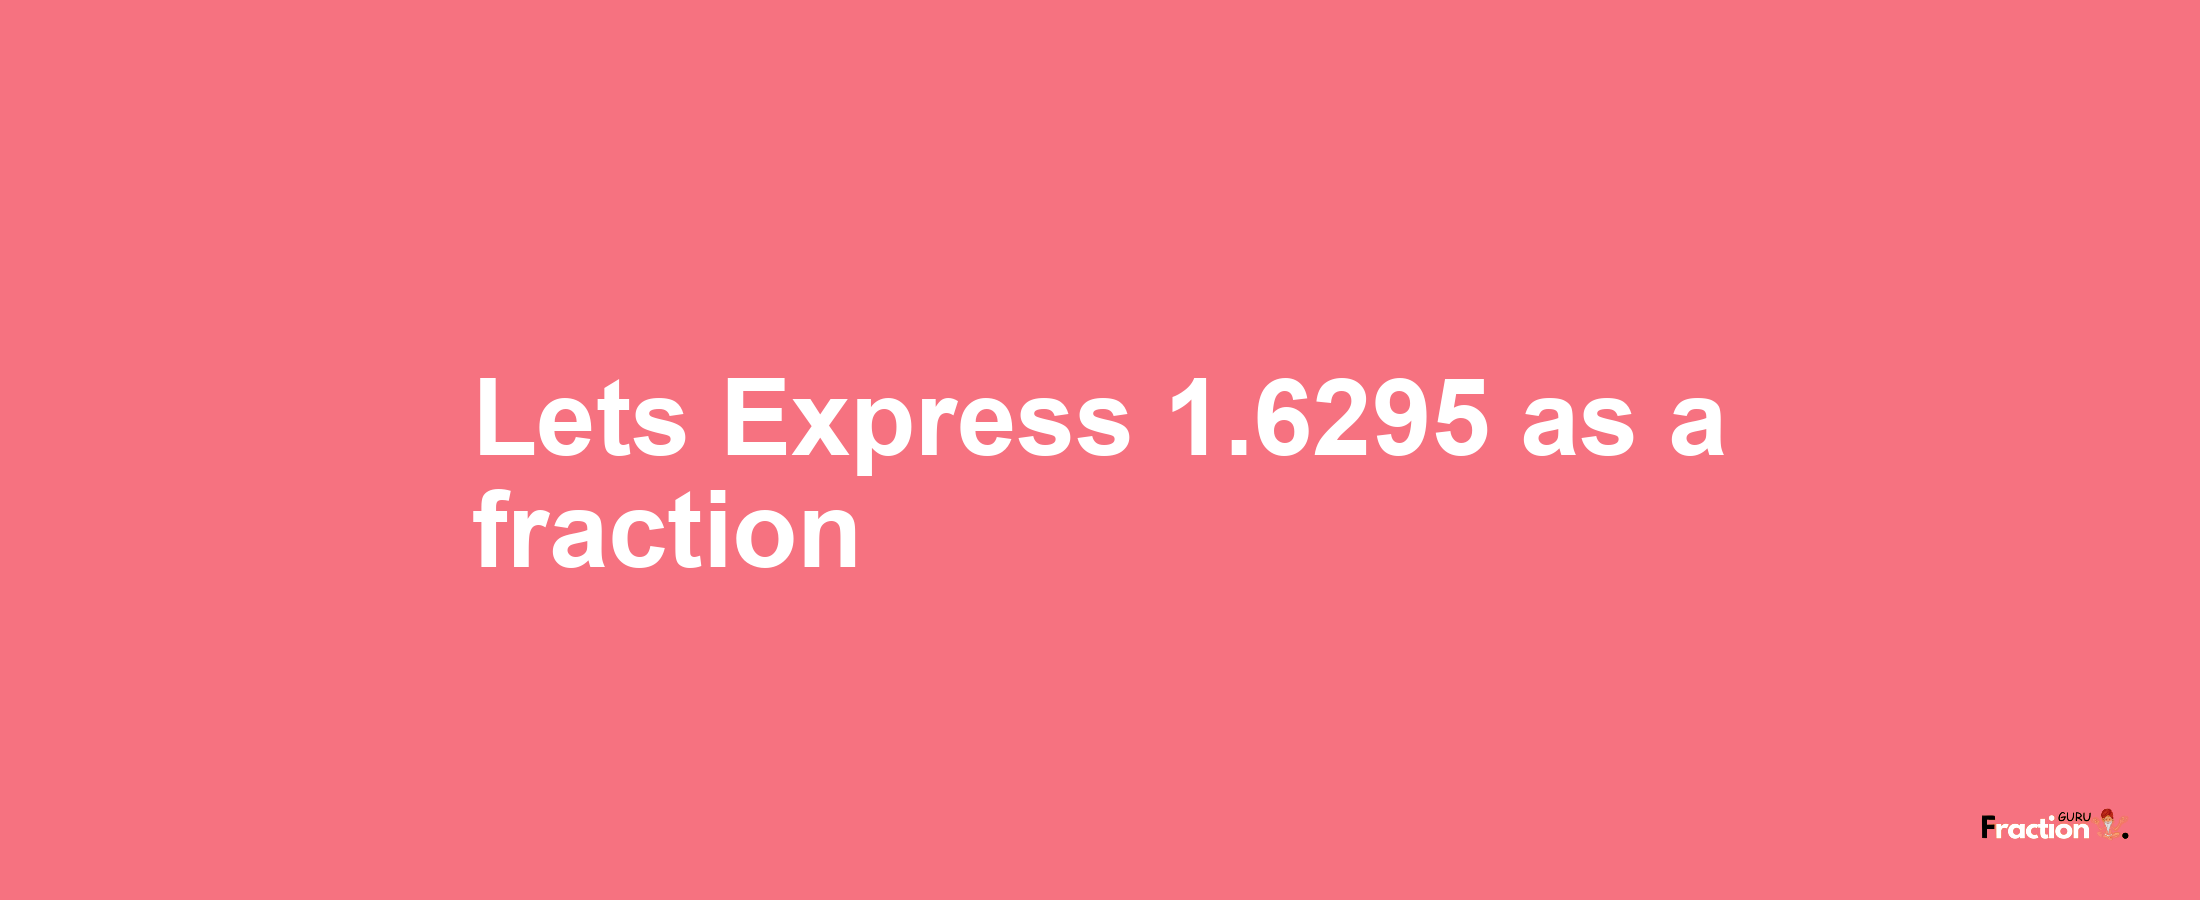 Lets Express 1.6295 as afraction